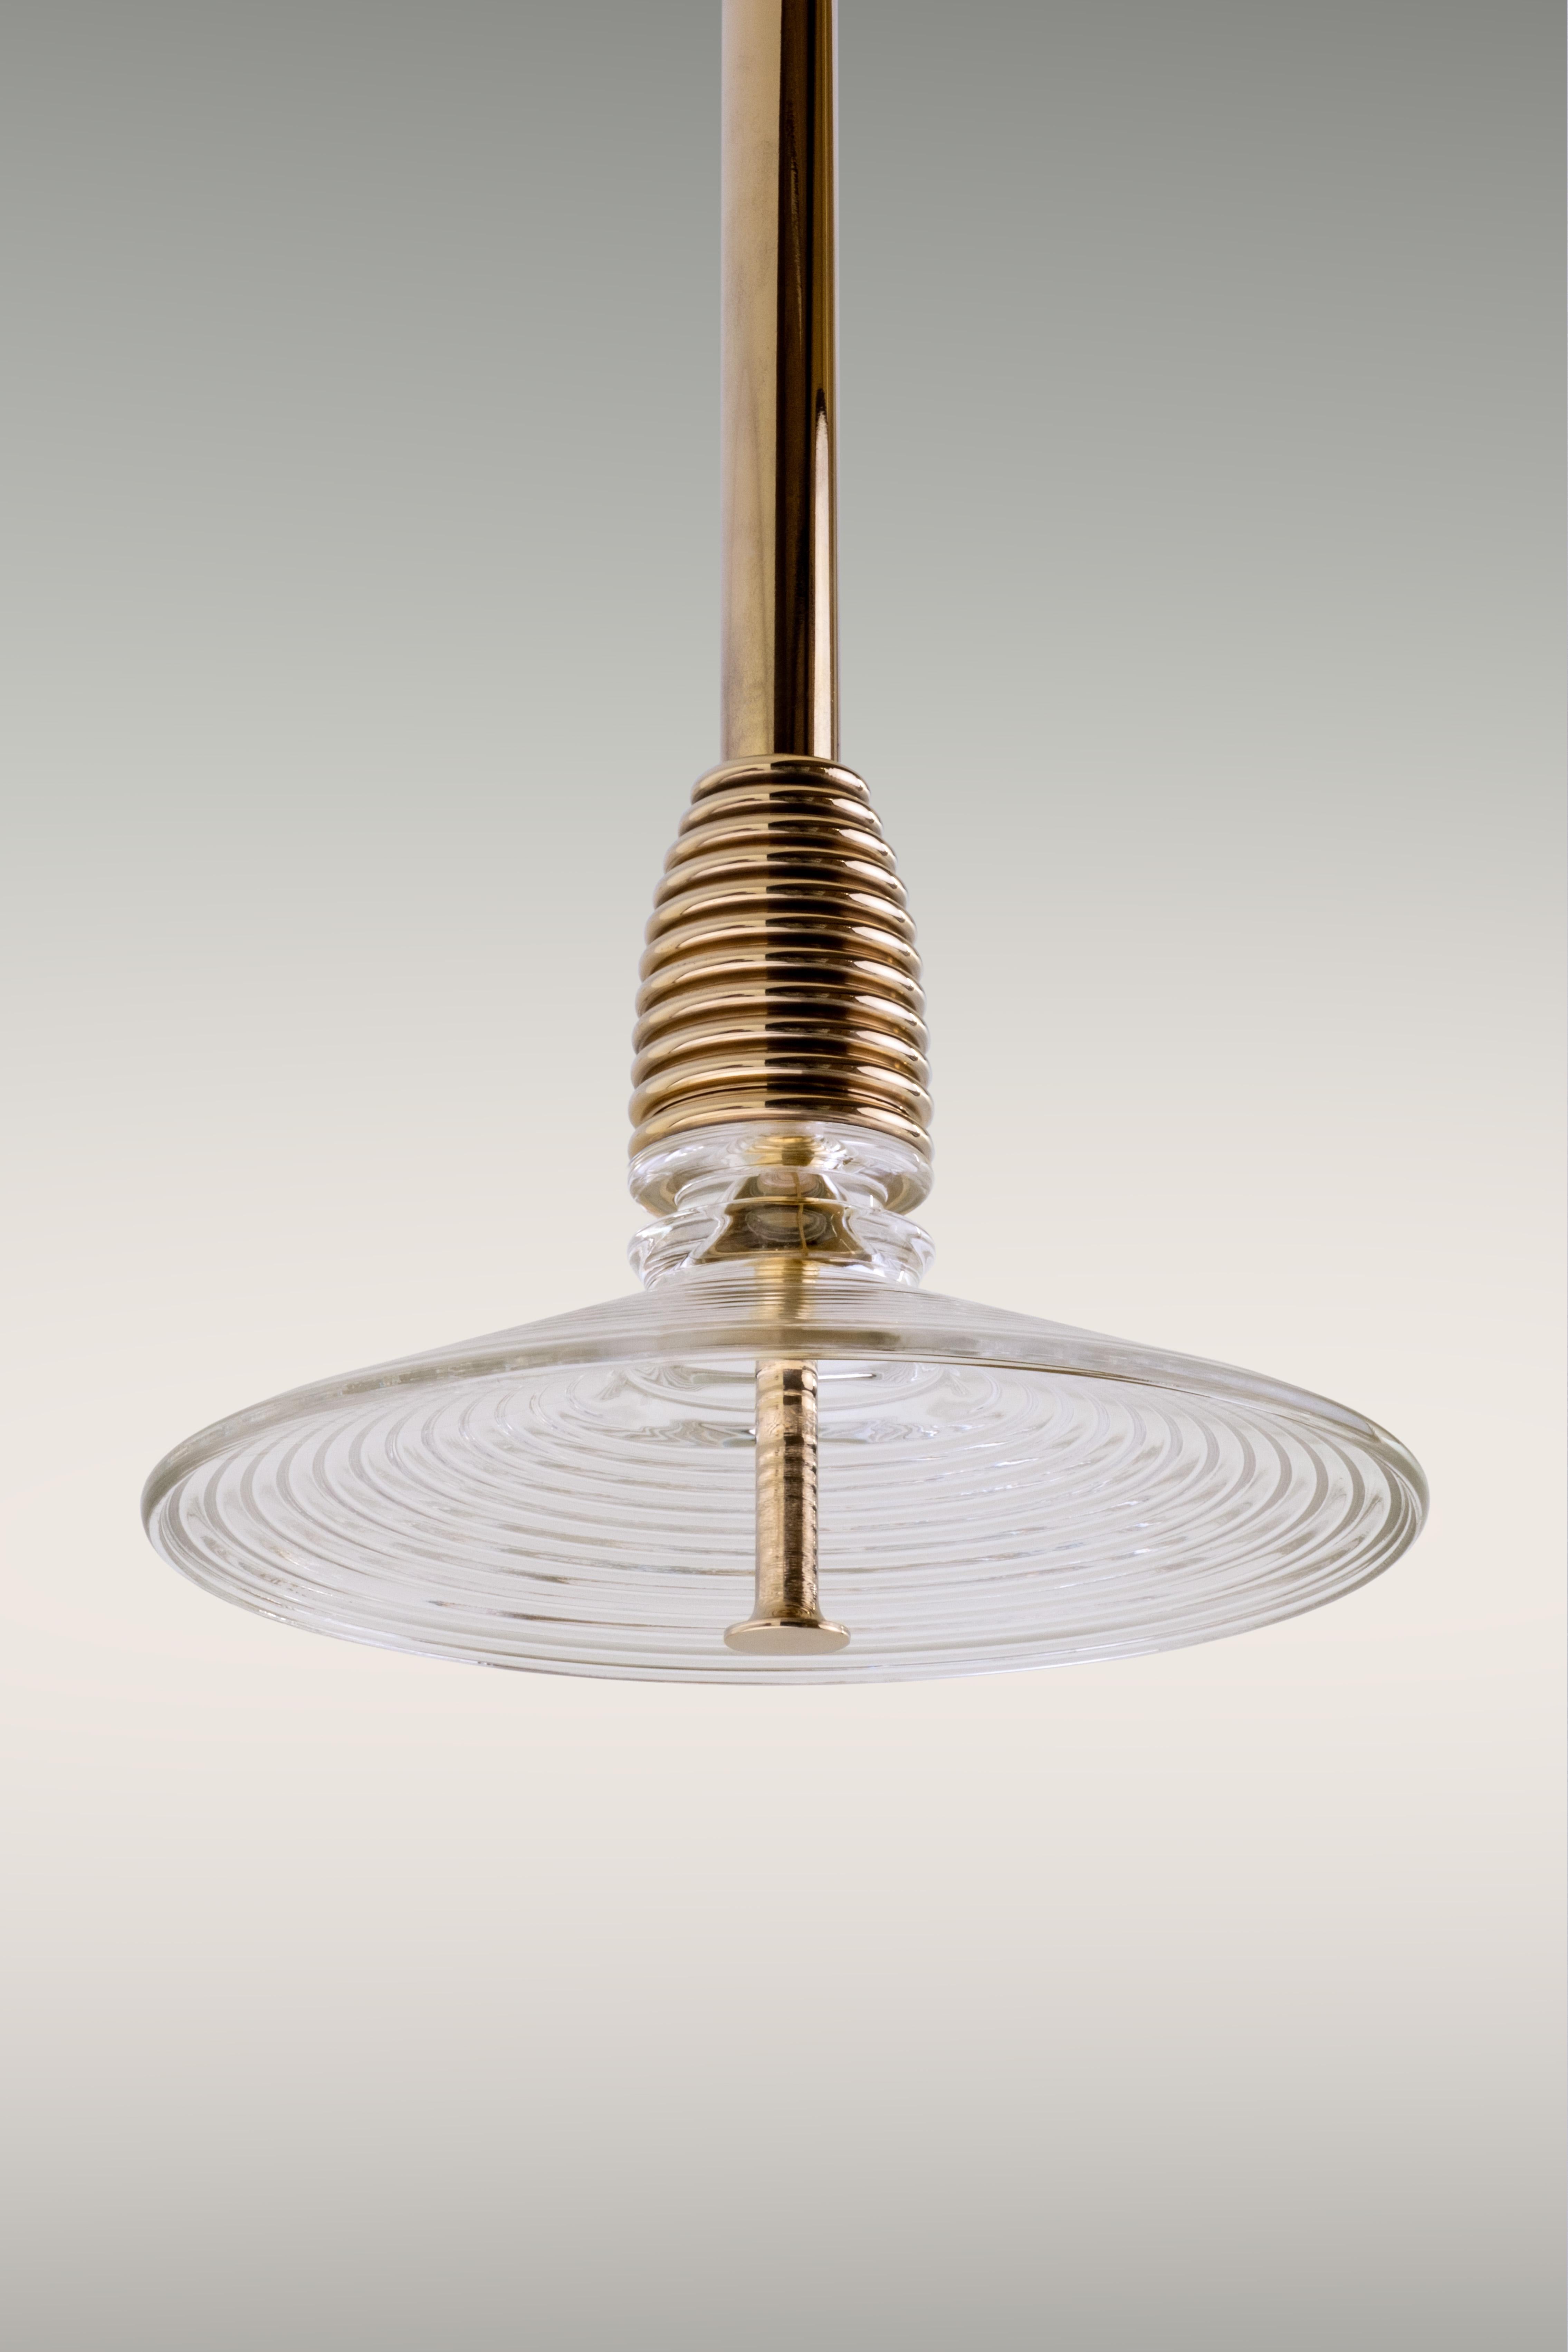 Inspired by our founder Richy's endless train journeys up and down Britain's East Coast mainline, by the rhythmic lattice of the overhead power lines, and by the intriguing saucer-like pin insulators which adorn them, The Insulator Collection is